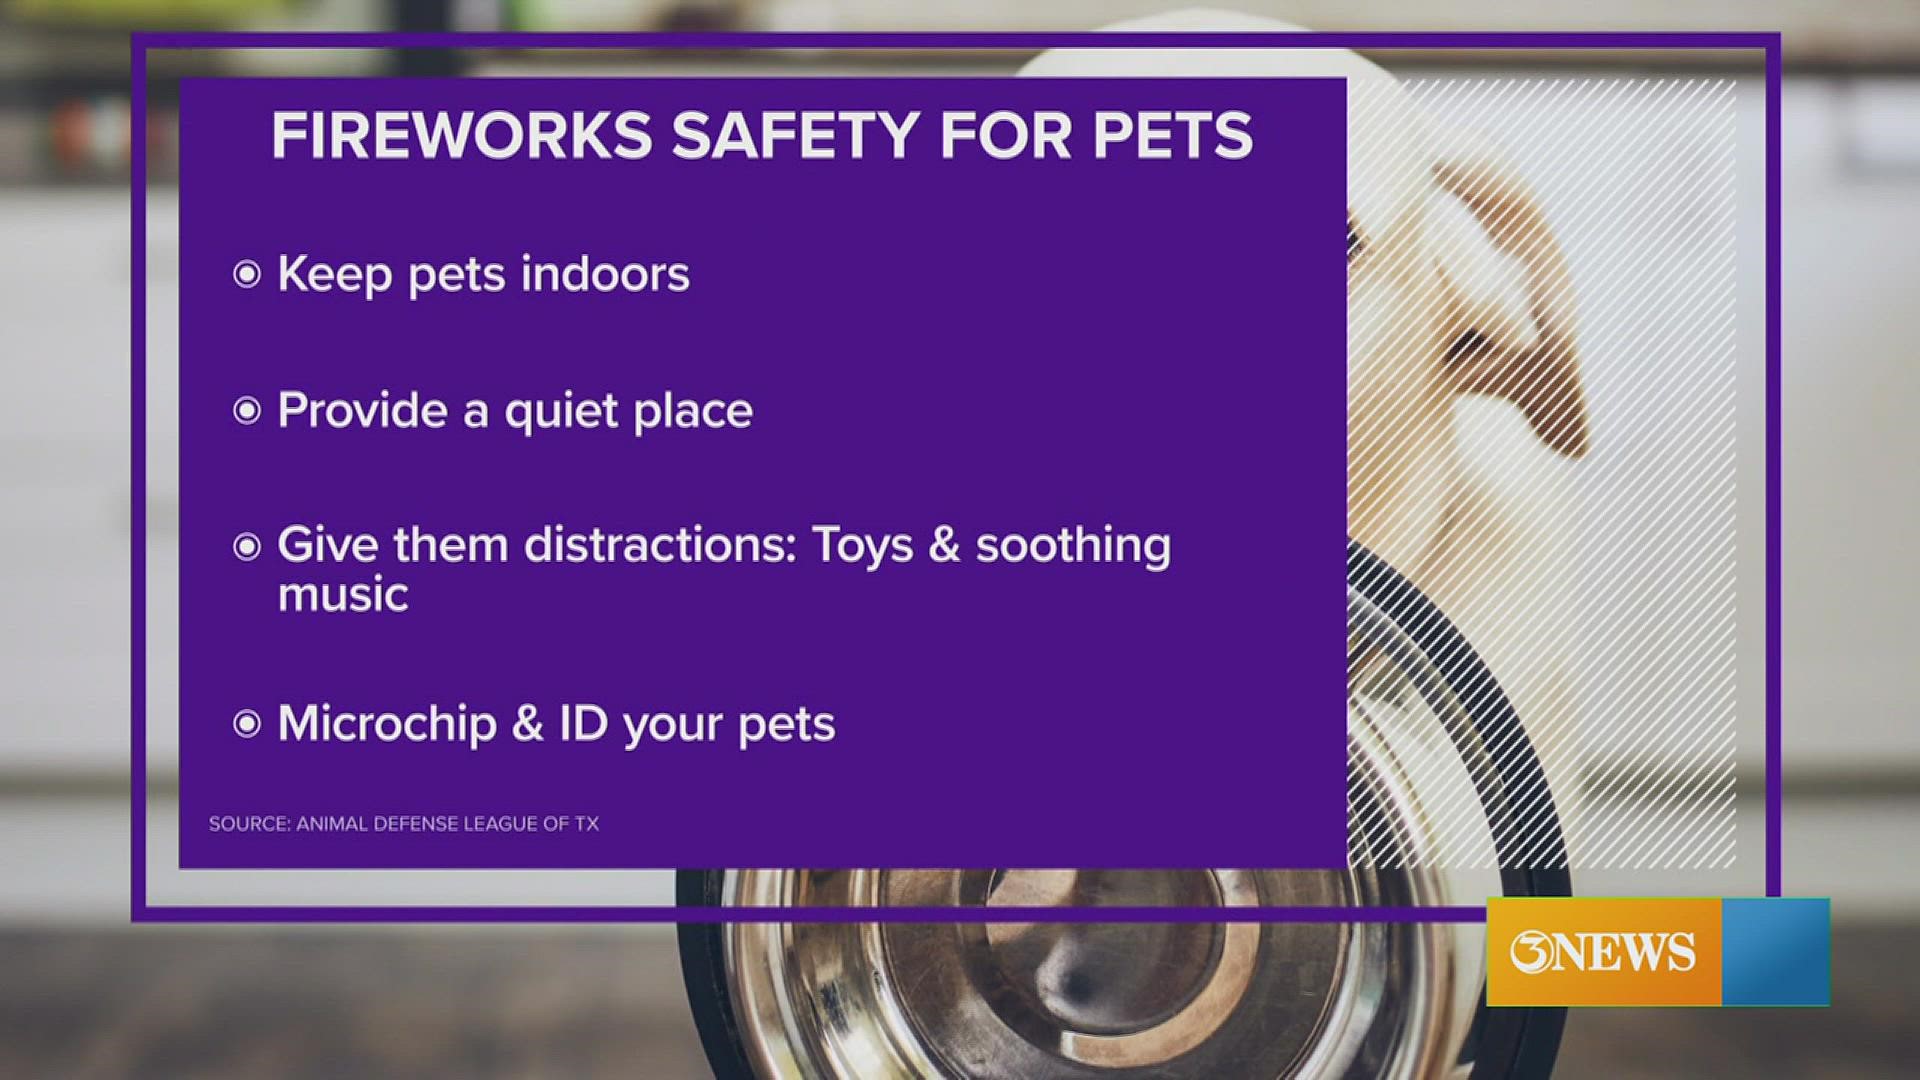 Be sure to keep close watch on your pets as they can get terrified of fireworks.